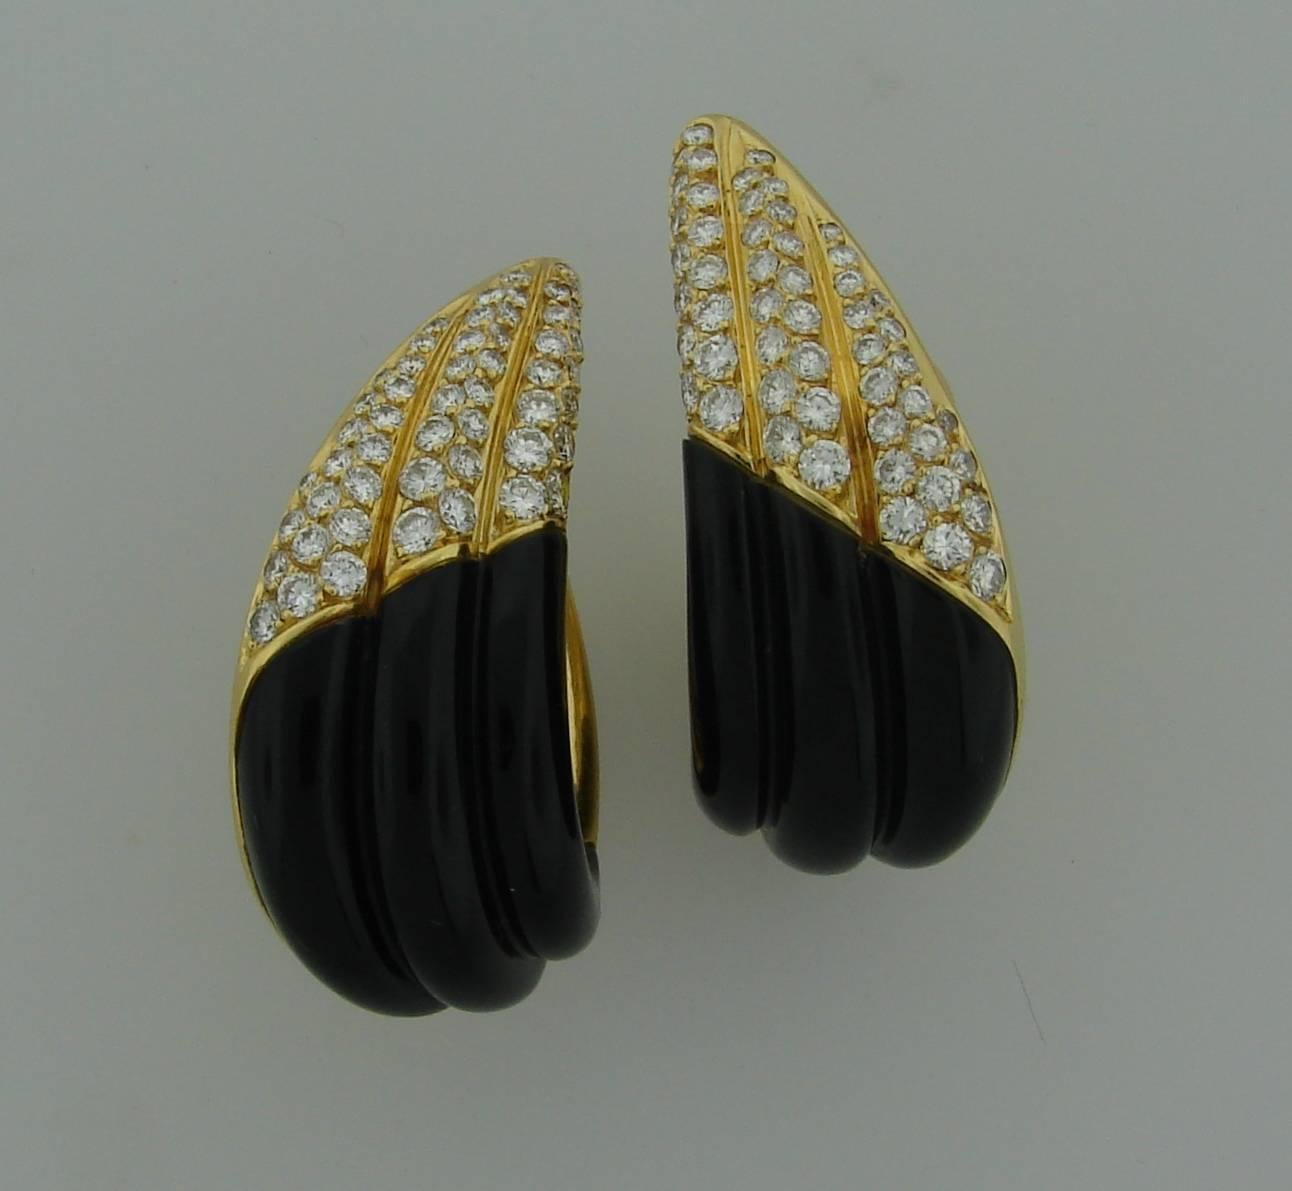 Stunning earrings created by Fred in Paris in the 1980's. Made of black onyx and 18k (stamped) yellow gold encrusted with one hundred four round brilliant cut diamonds (total weight is approximately 3.52 carats). The diamonds are of F-G color and